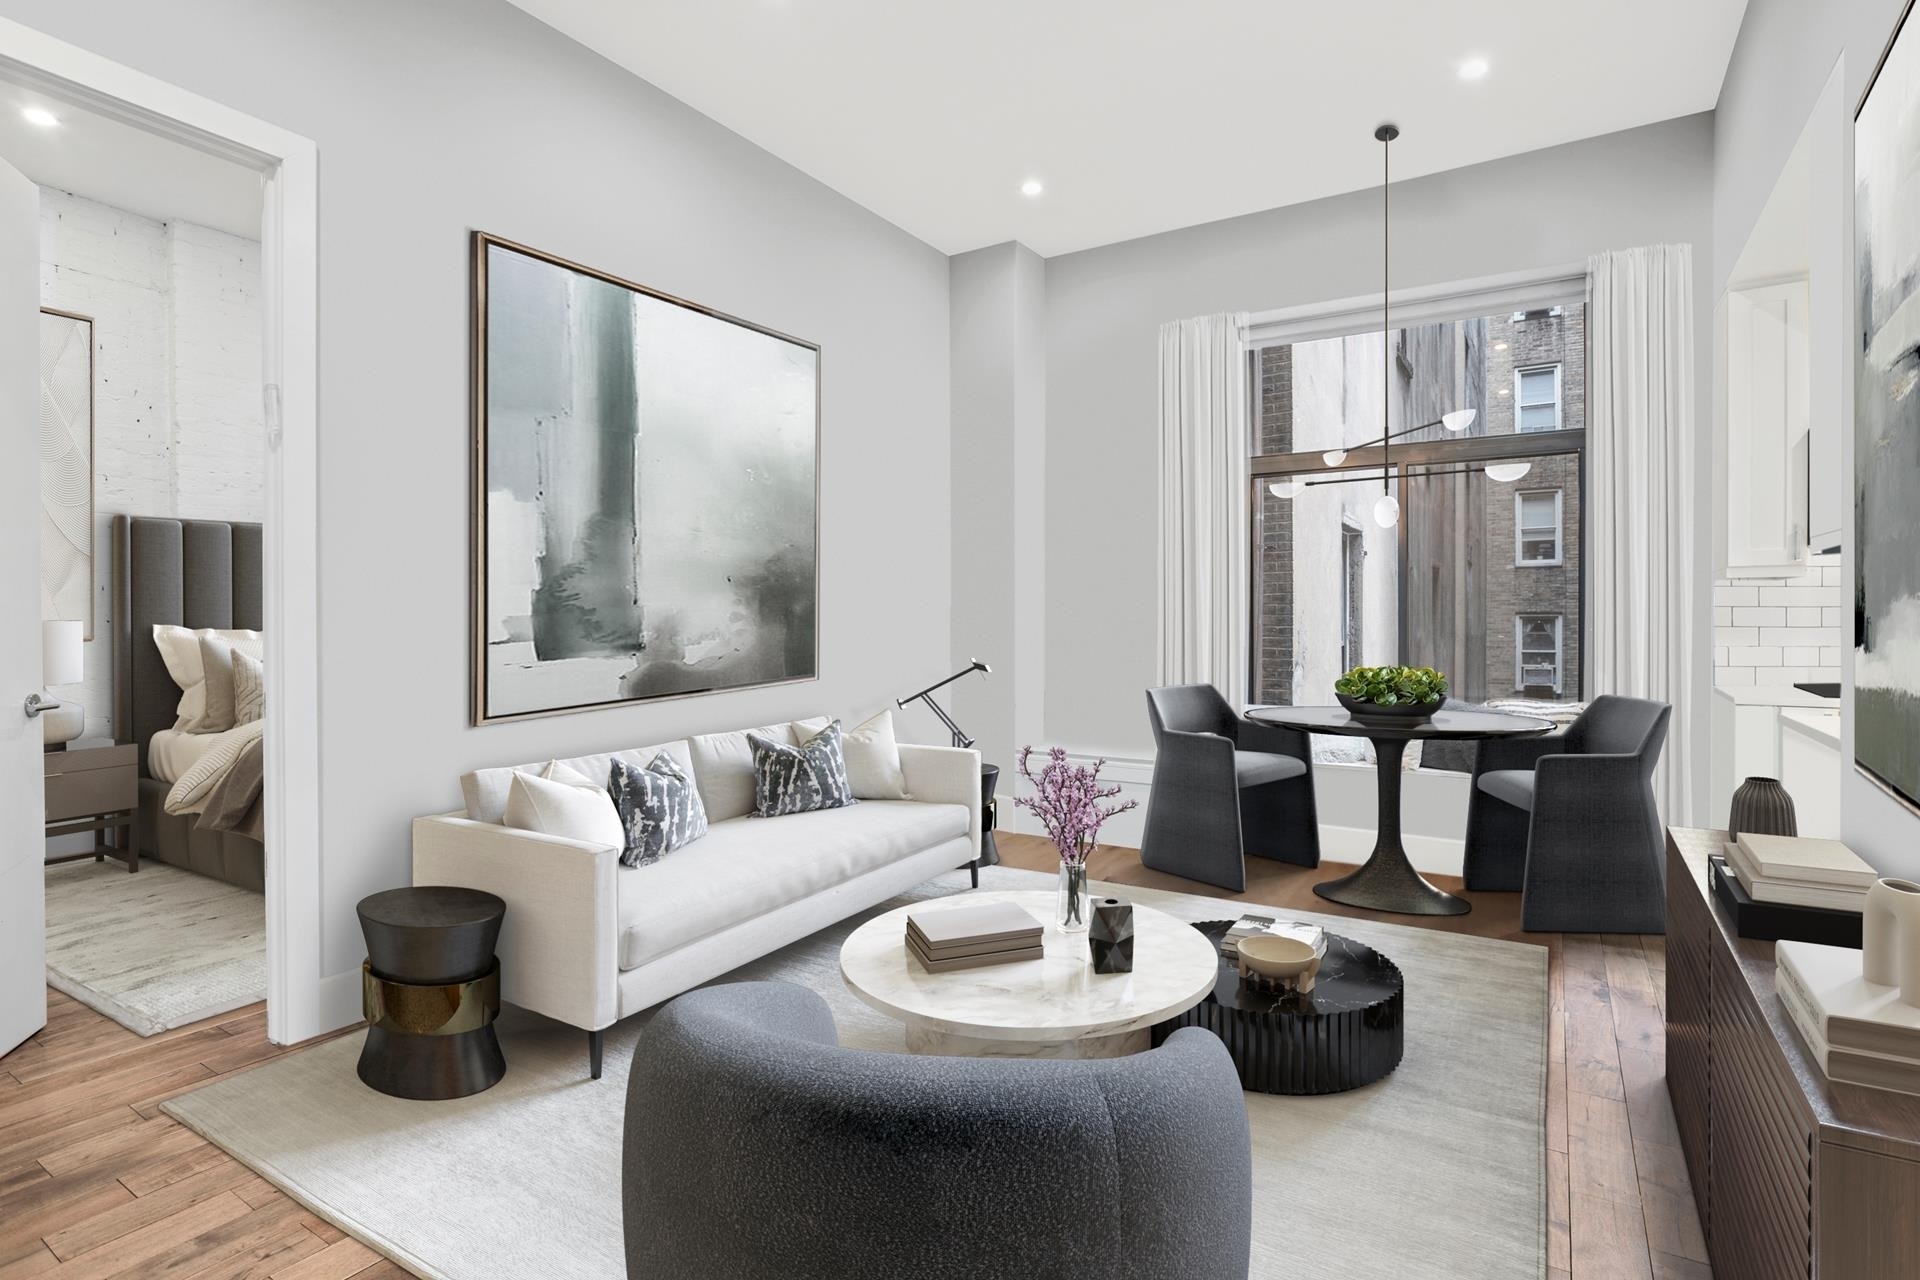 Co-op Properties for Sale at The Albert, 23 E 10TH ST, 3H Greenwich Village, New York, NY 10003